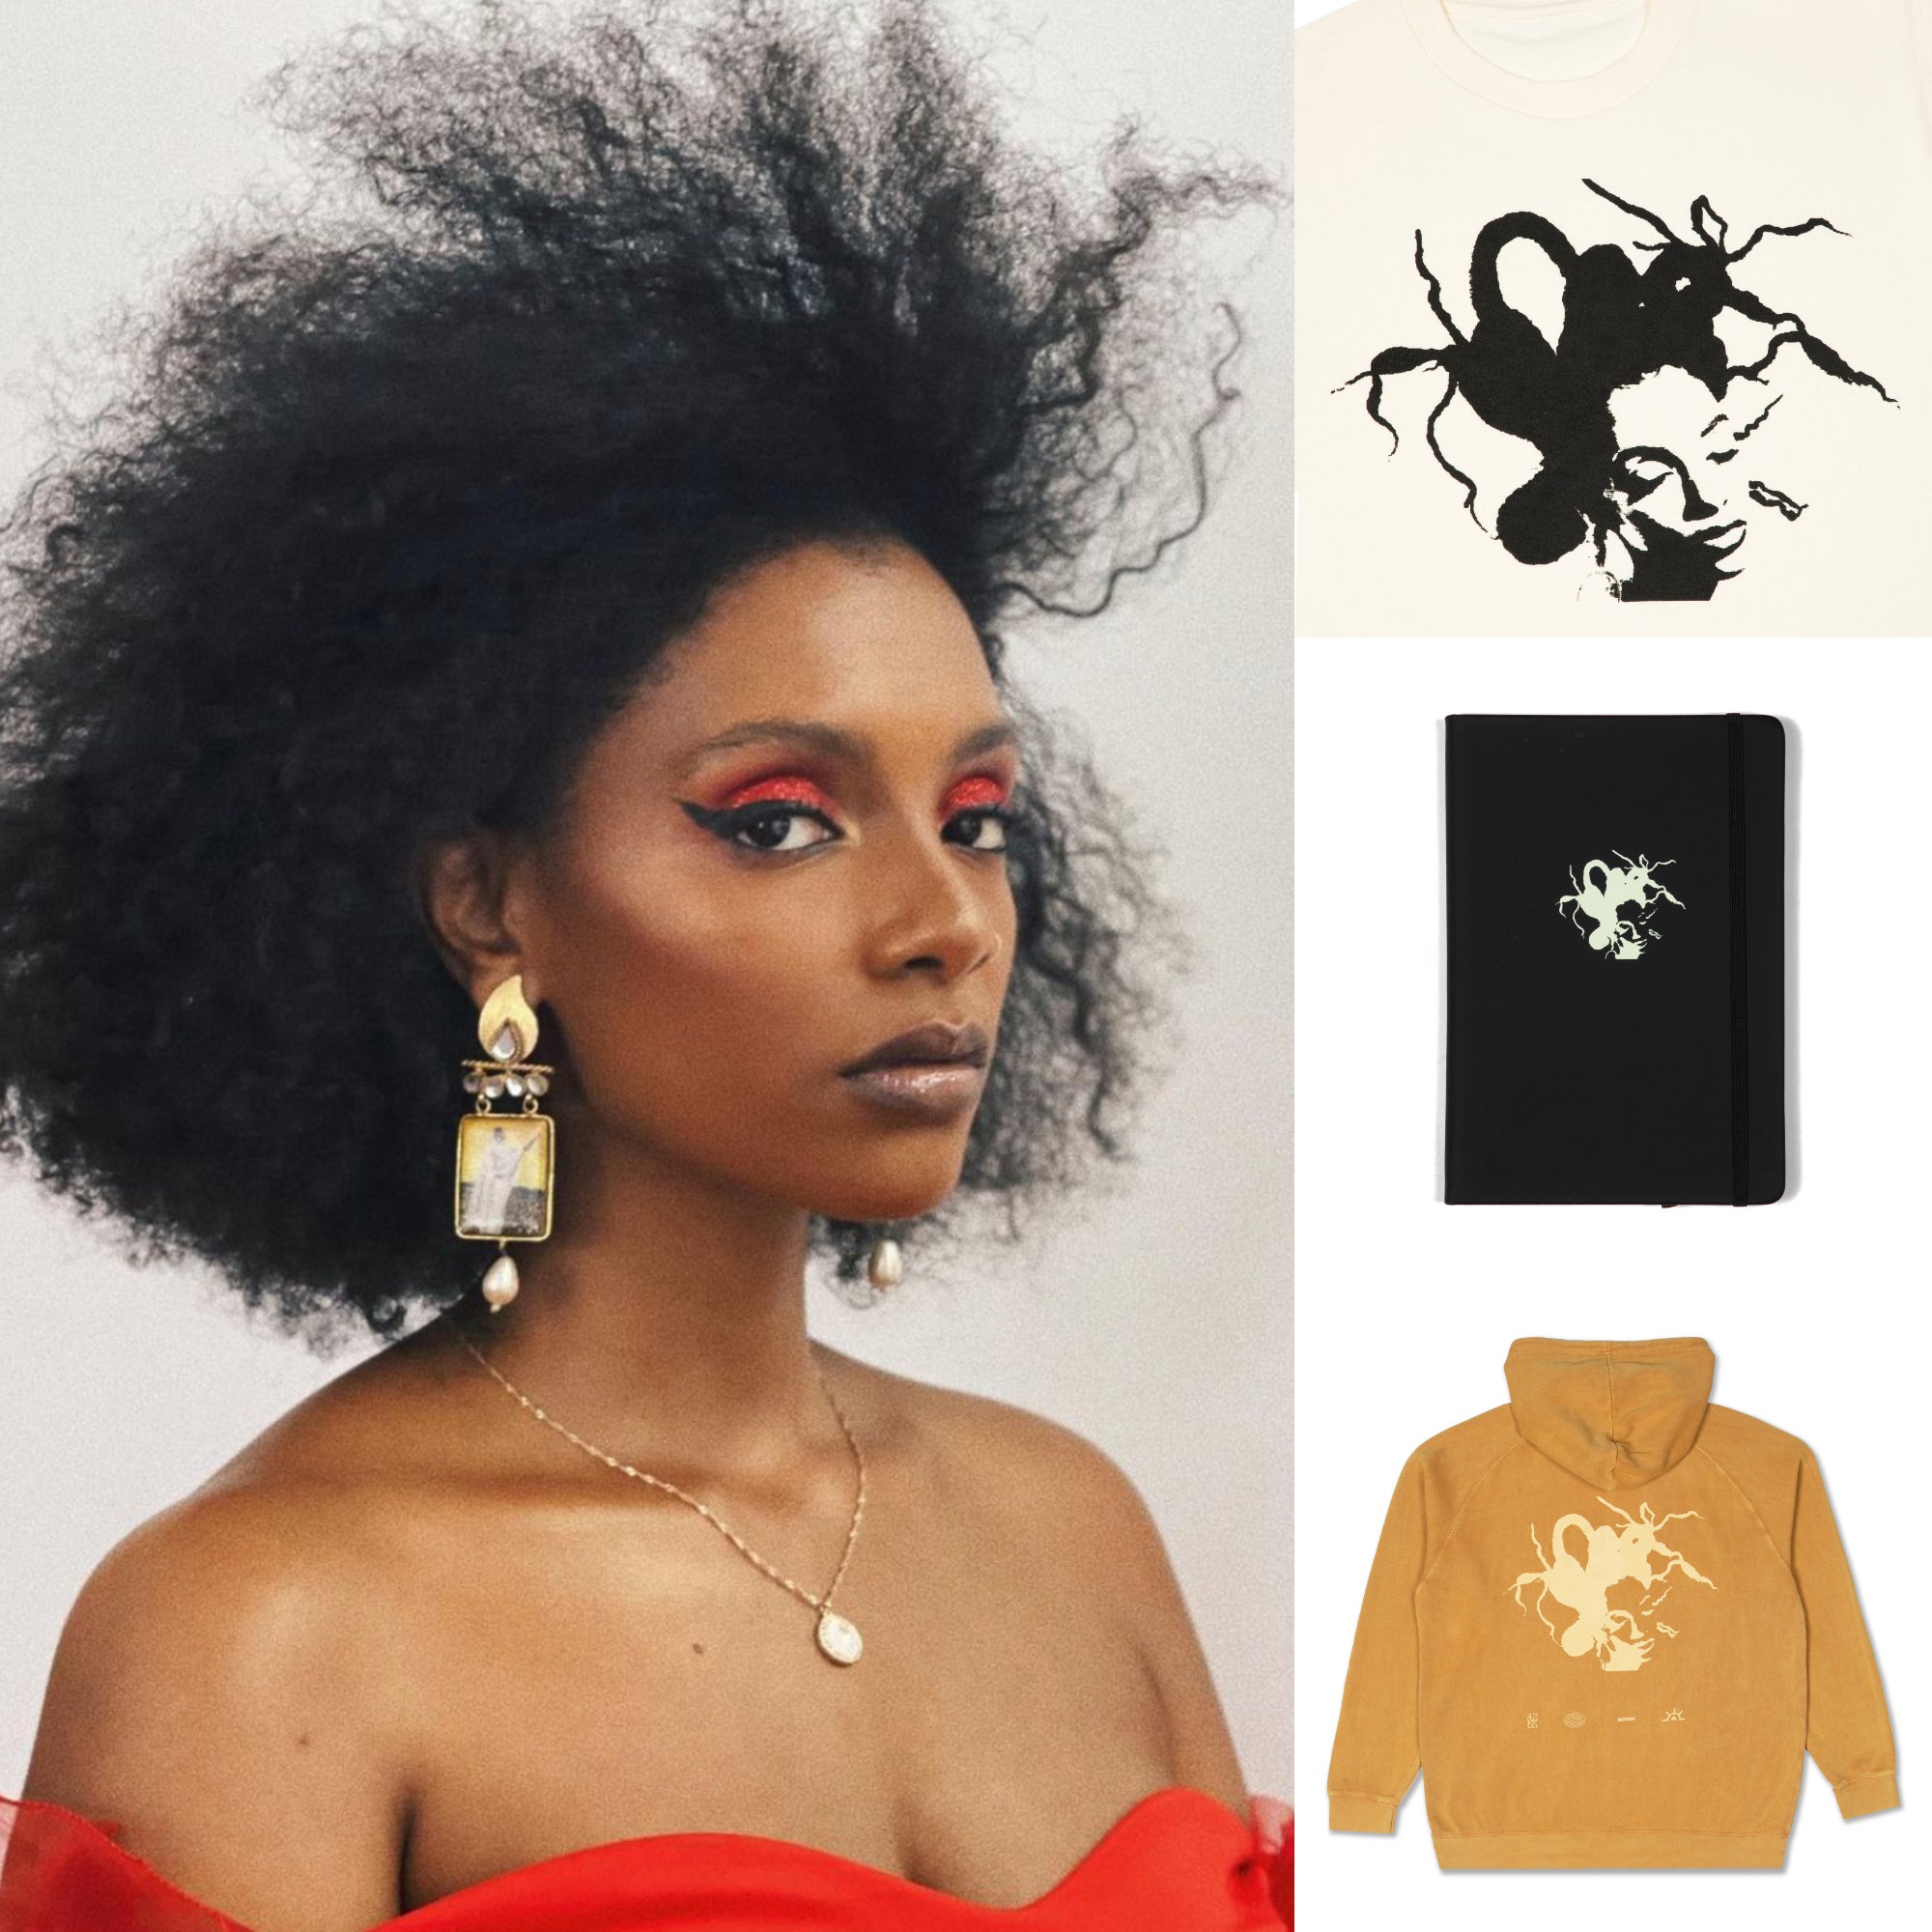 Mereba’s First Official Merch Line Is Here!